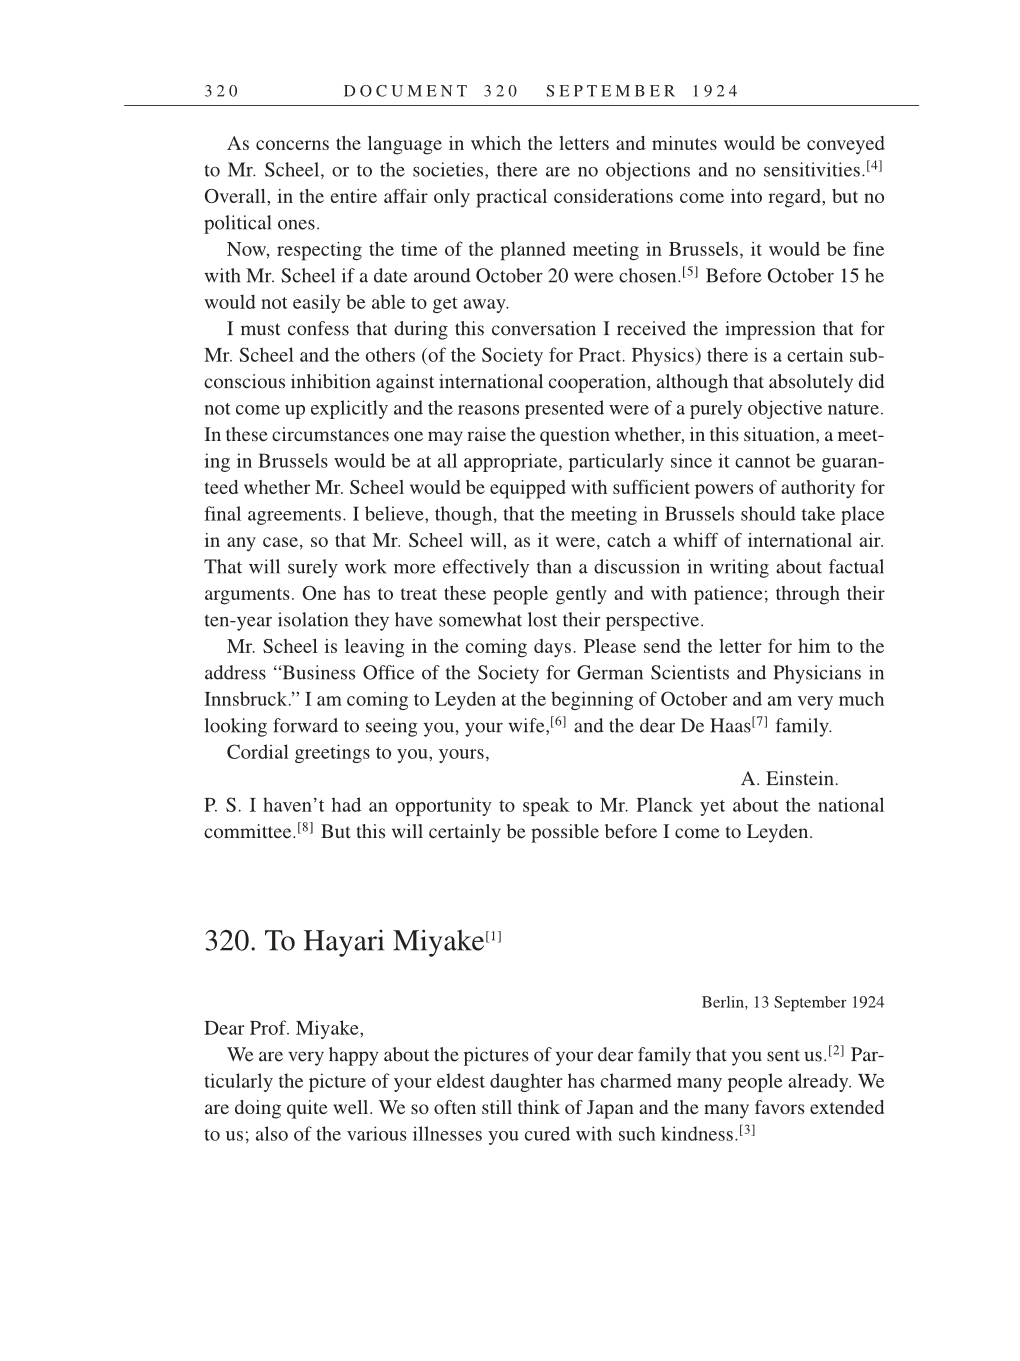 Volume 14: The Berlin Years: Writings & Correspondence, April 1923-May 1925 (English Translation Supplement) page 320